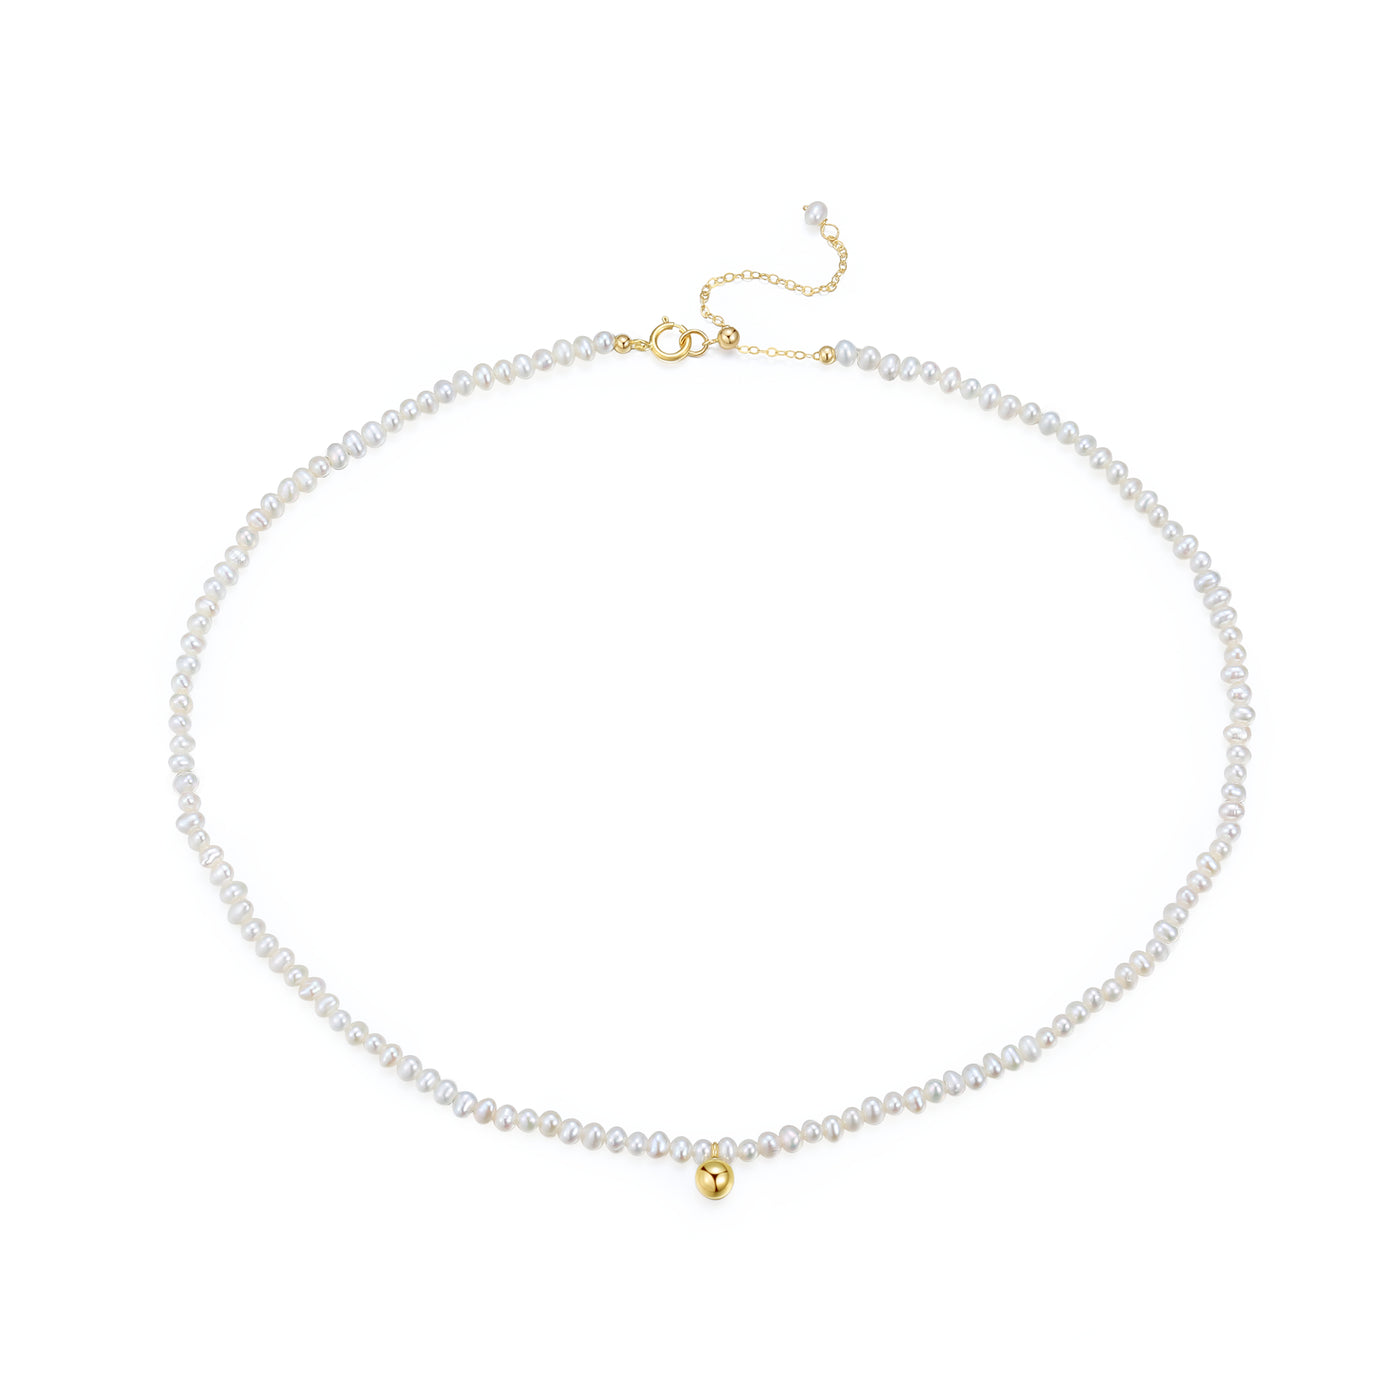 COCO KIM Flowing Pearl Series Simple Gold Bead Choker Necklace